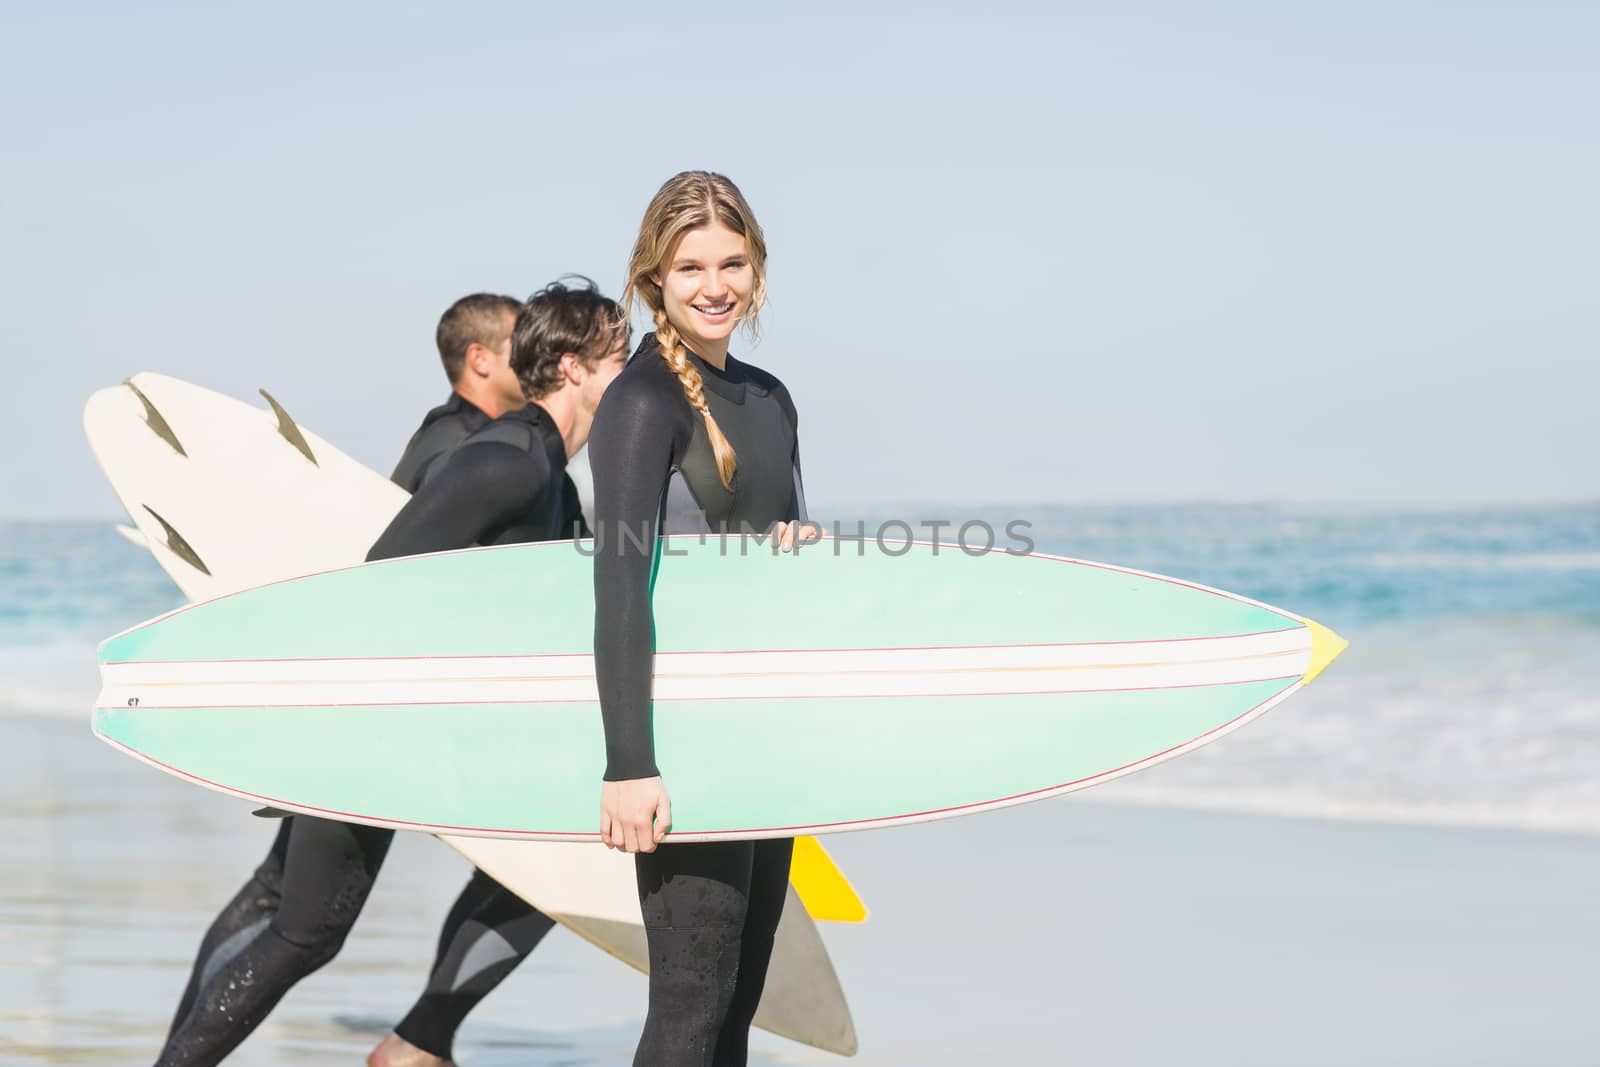 Portrait of surfer woman with surfboard standing on the beach and others surfer in background